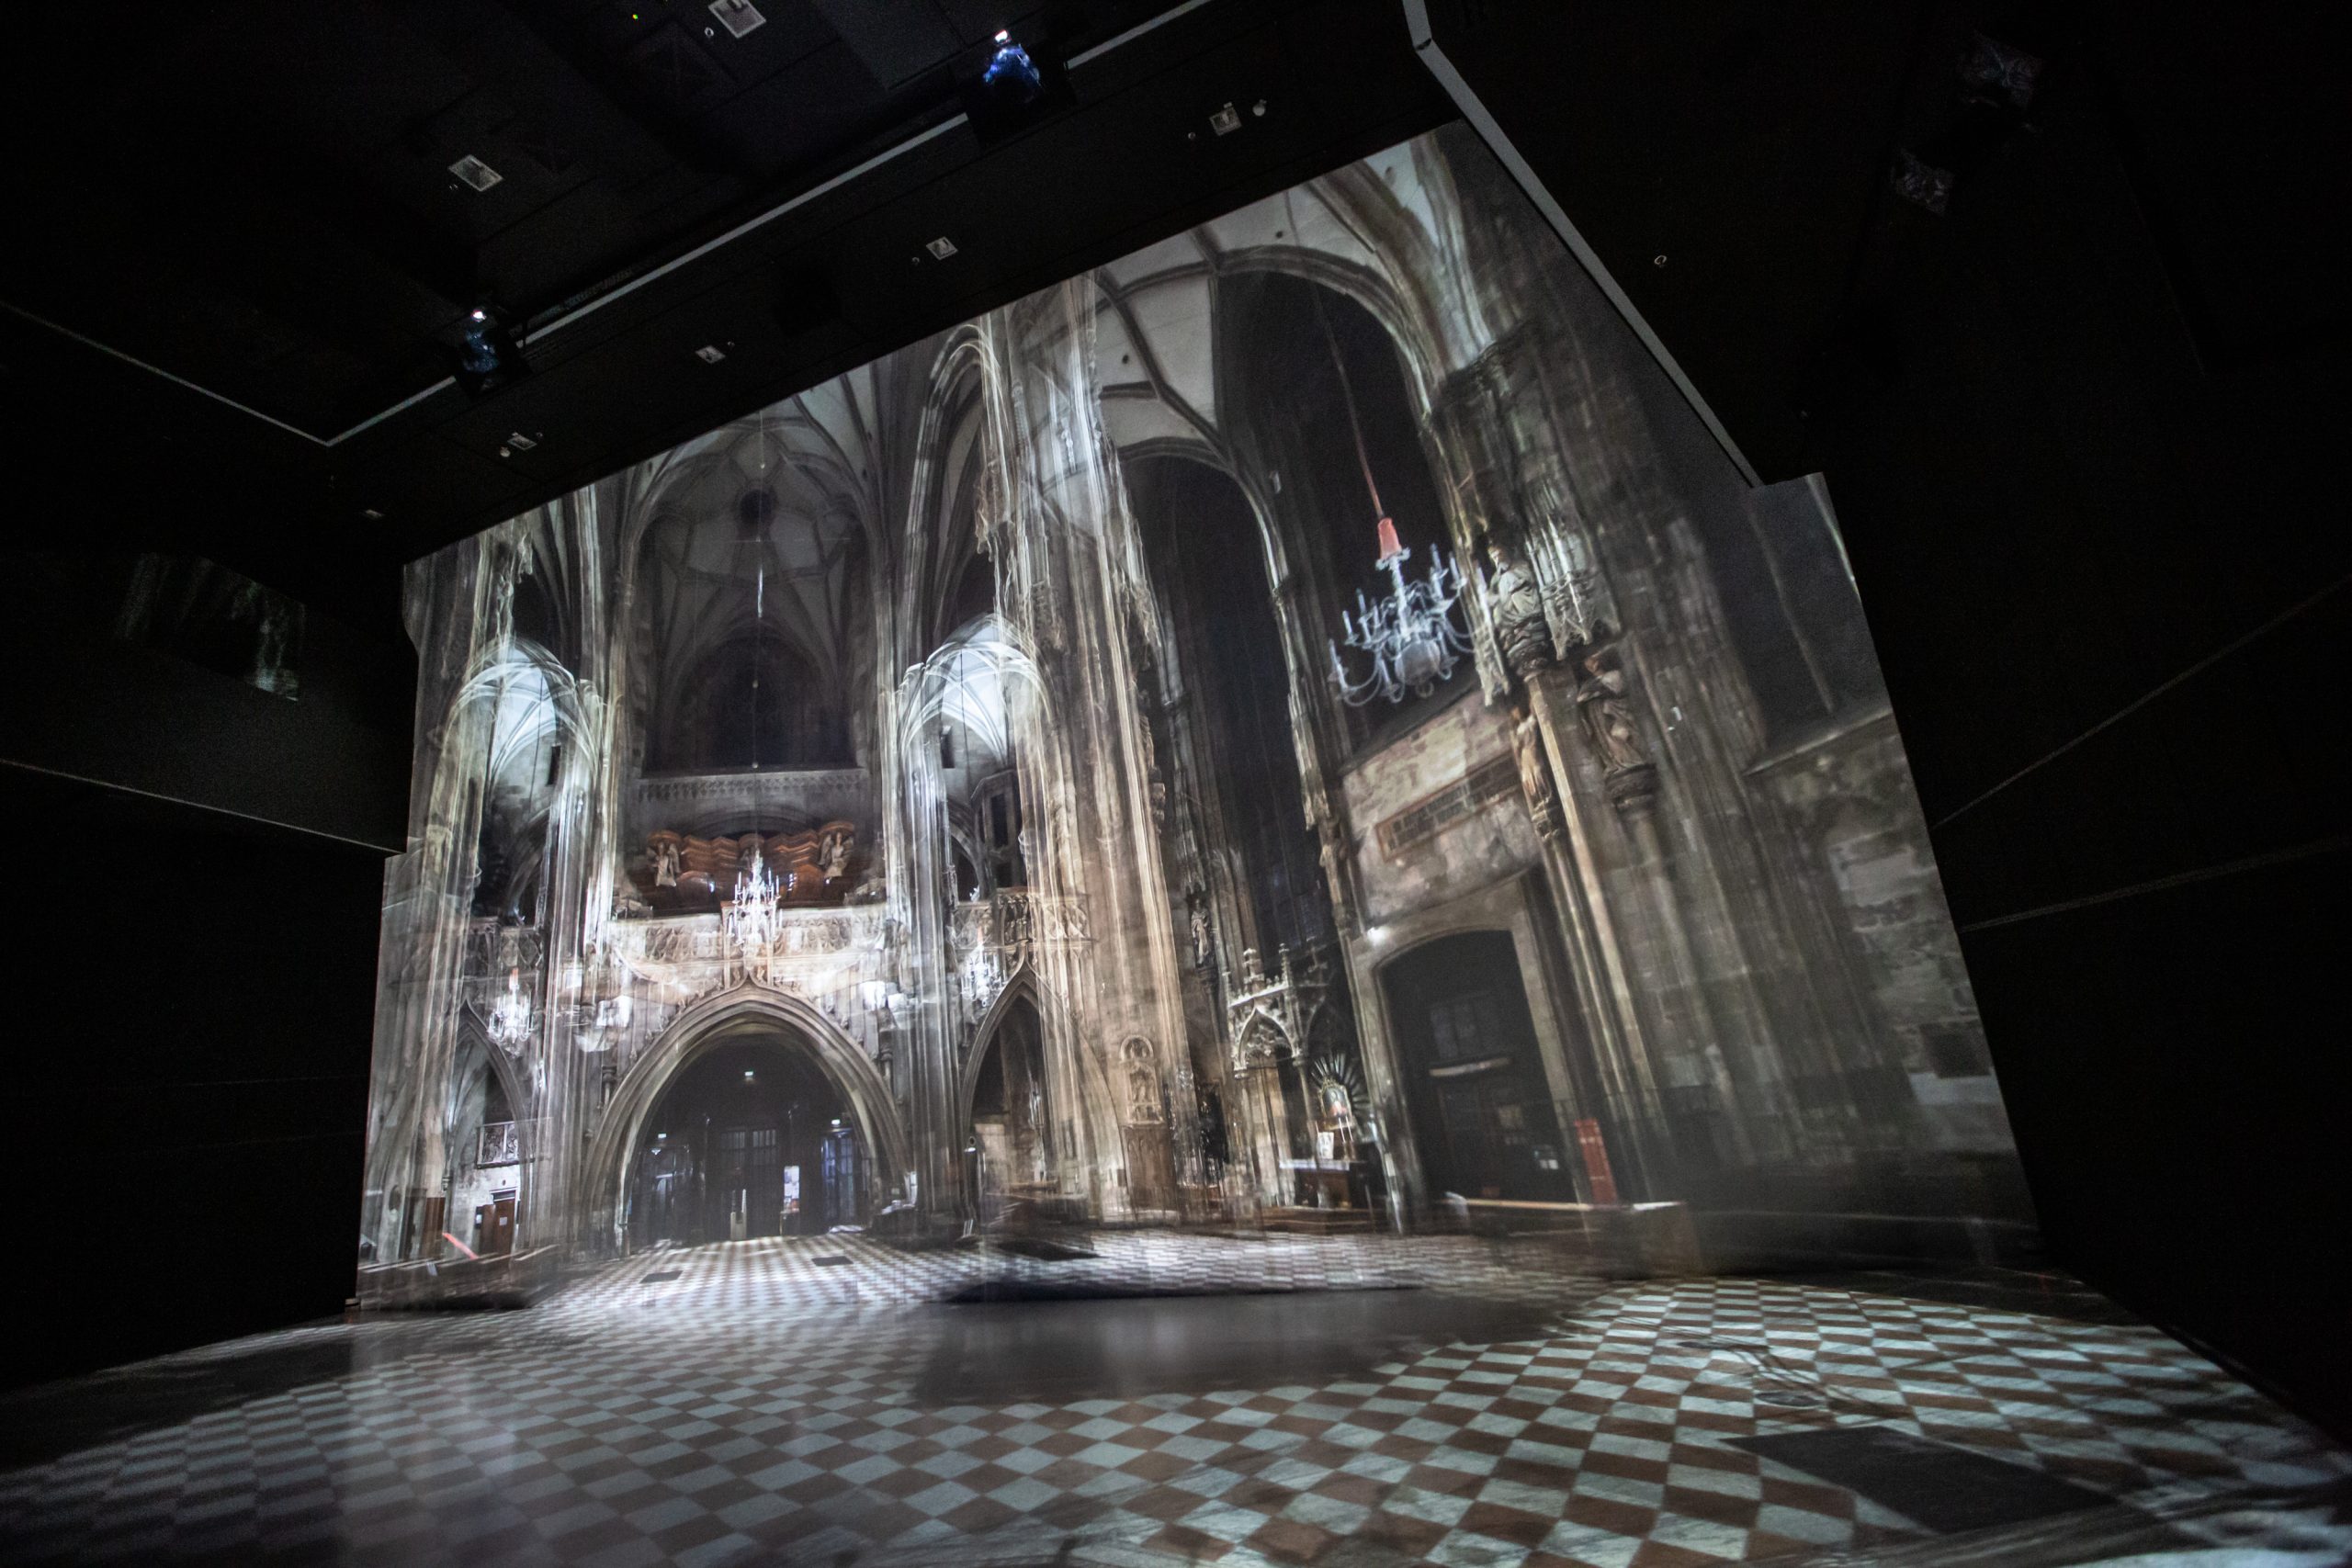 Immersify: The Translucent St. Stephen’s Cathedral – Artist Presentation / ScanLAB Projects (UK), RIEGL Laser Measurement Systems (AT), Dombauhütte St. Stephan zu Wien (AT), Ars Electronica Futurelab (AT)